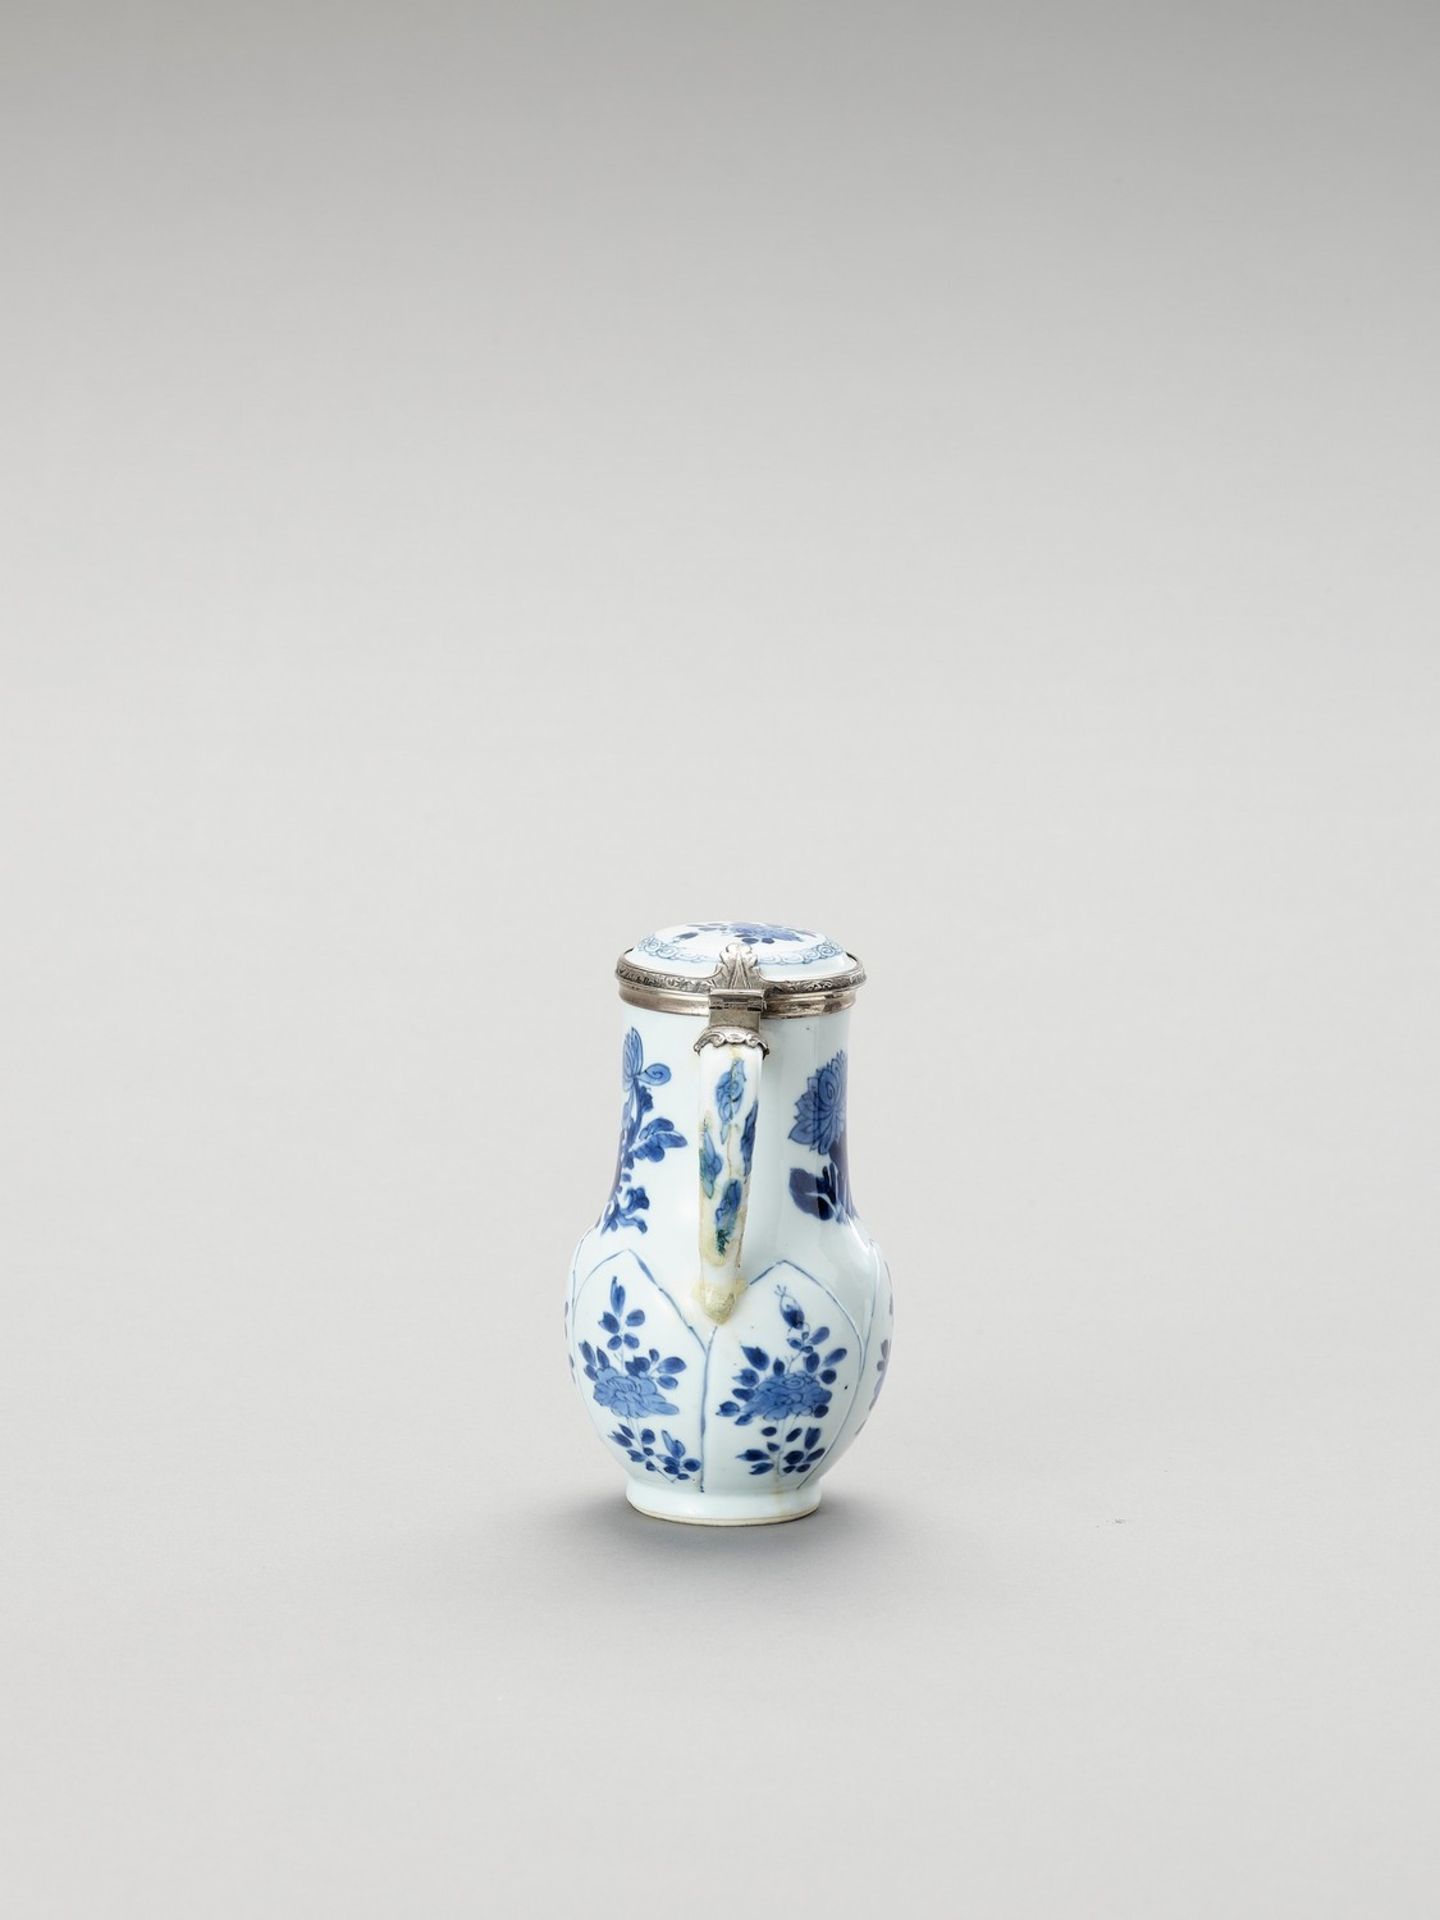 A SILVER-MOUNTED BLUE AND WHITE PORCELAIN JUG - Image 3 of 7